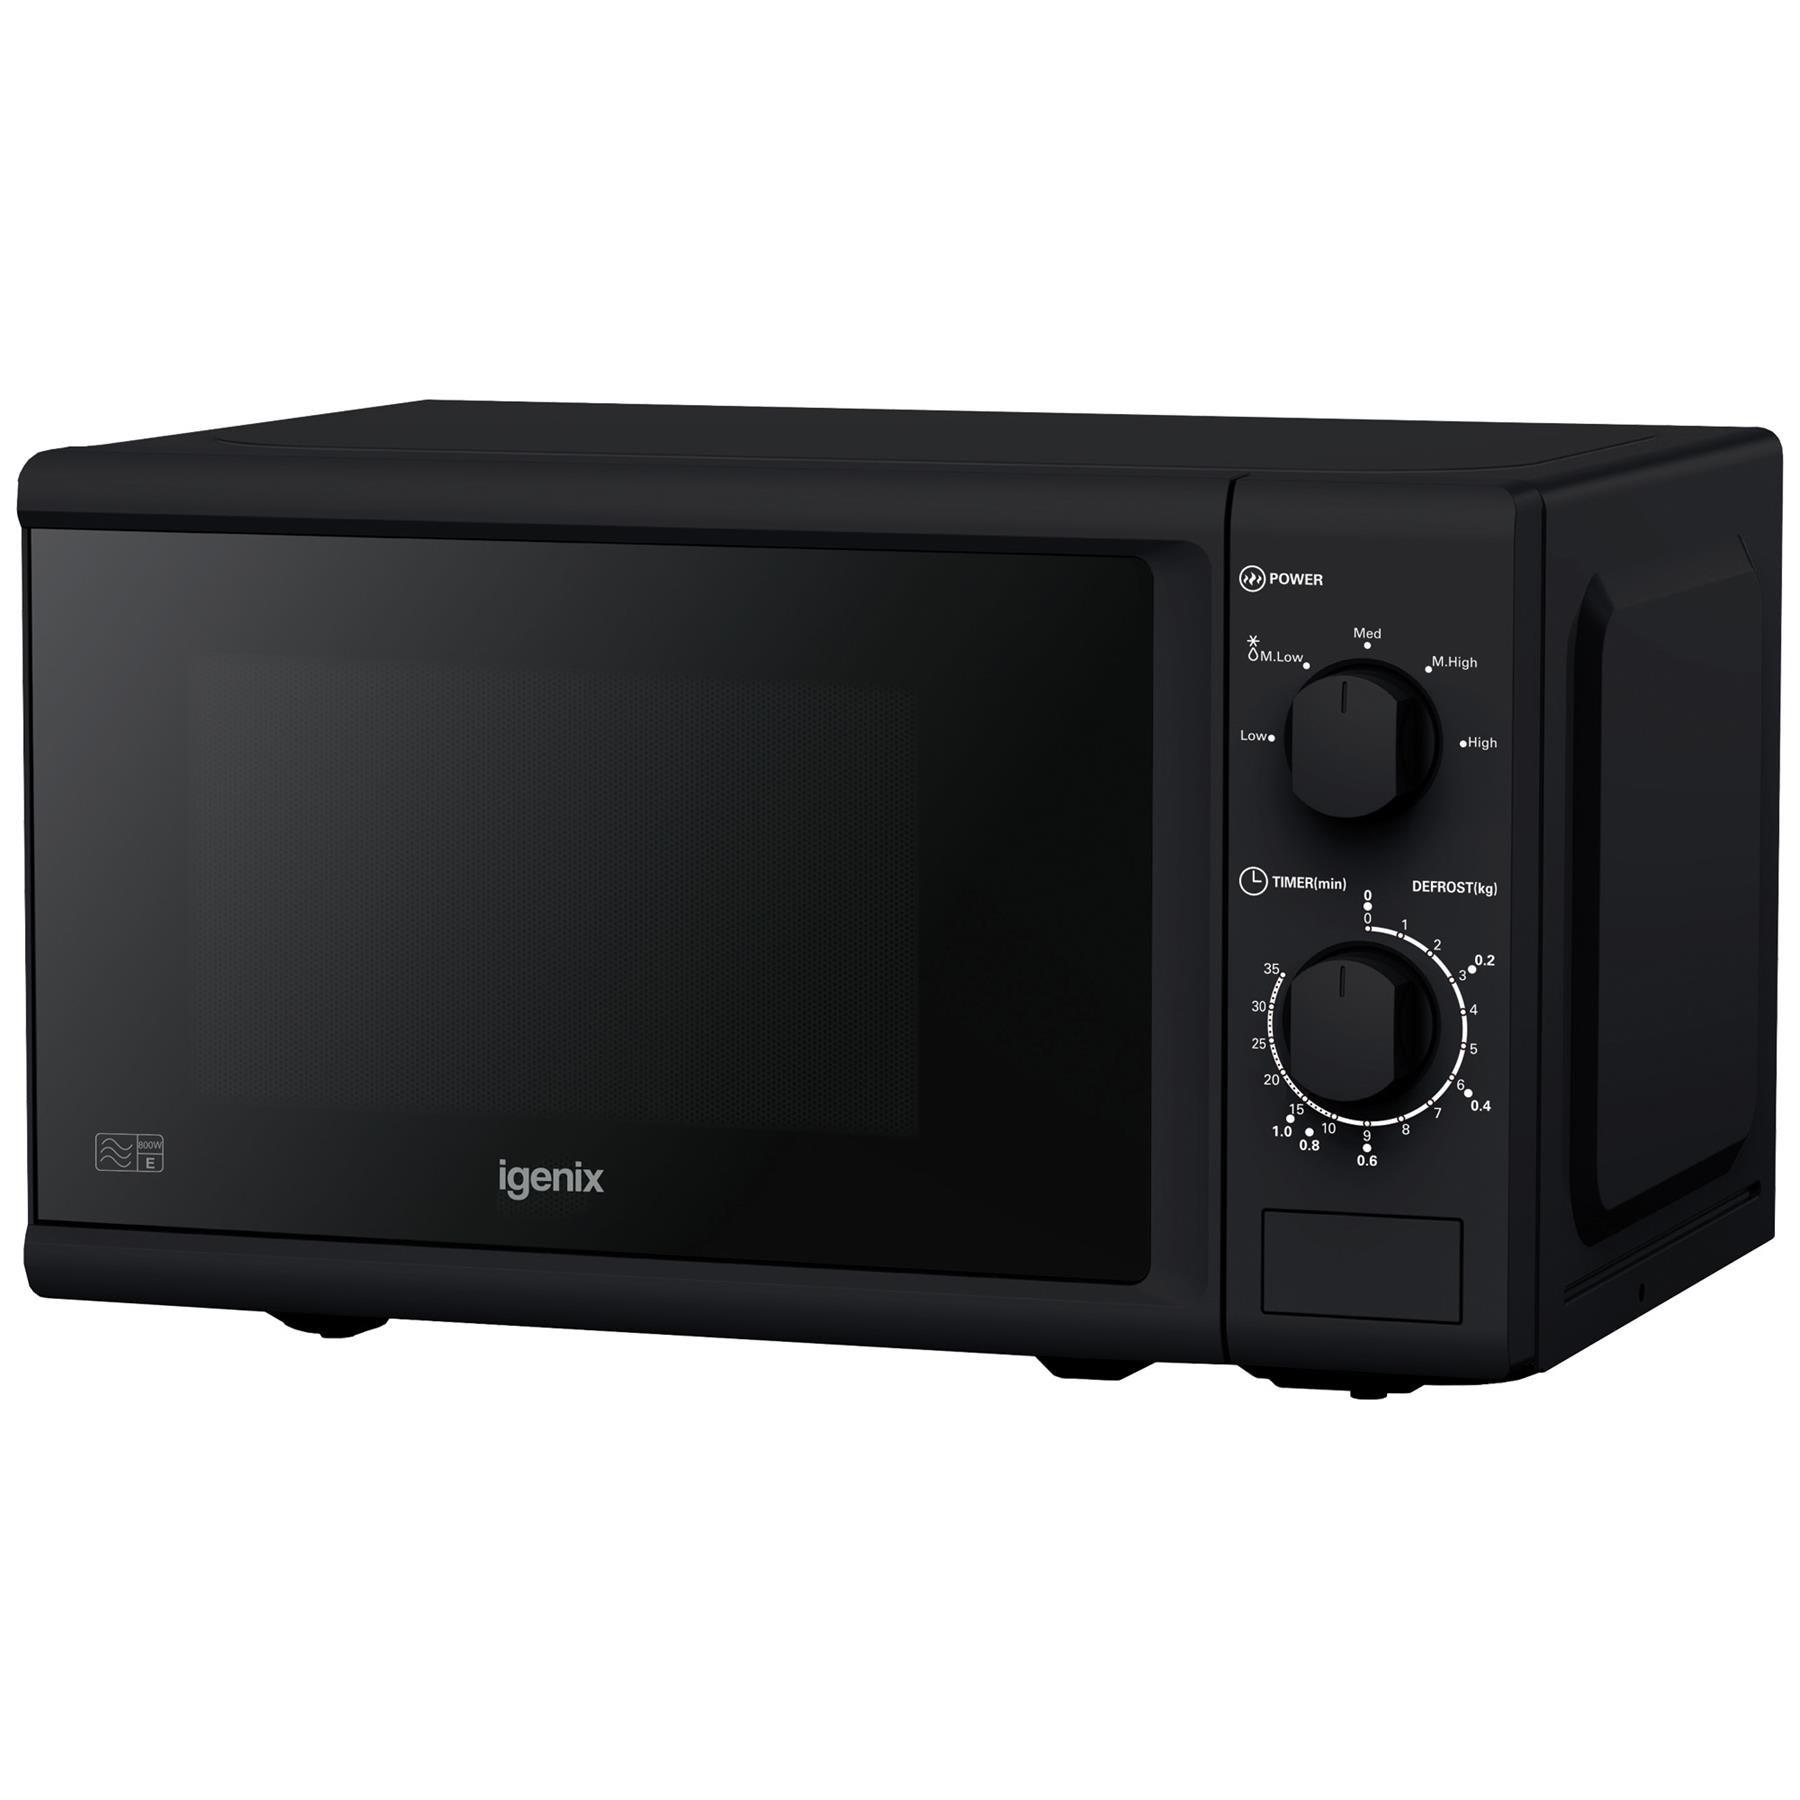 Solo Microwave, 35 Minute Timer, 800W